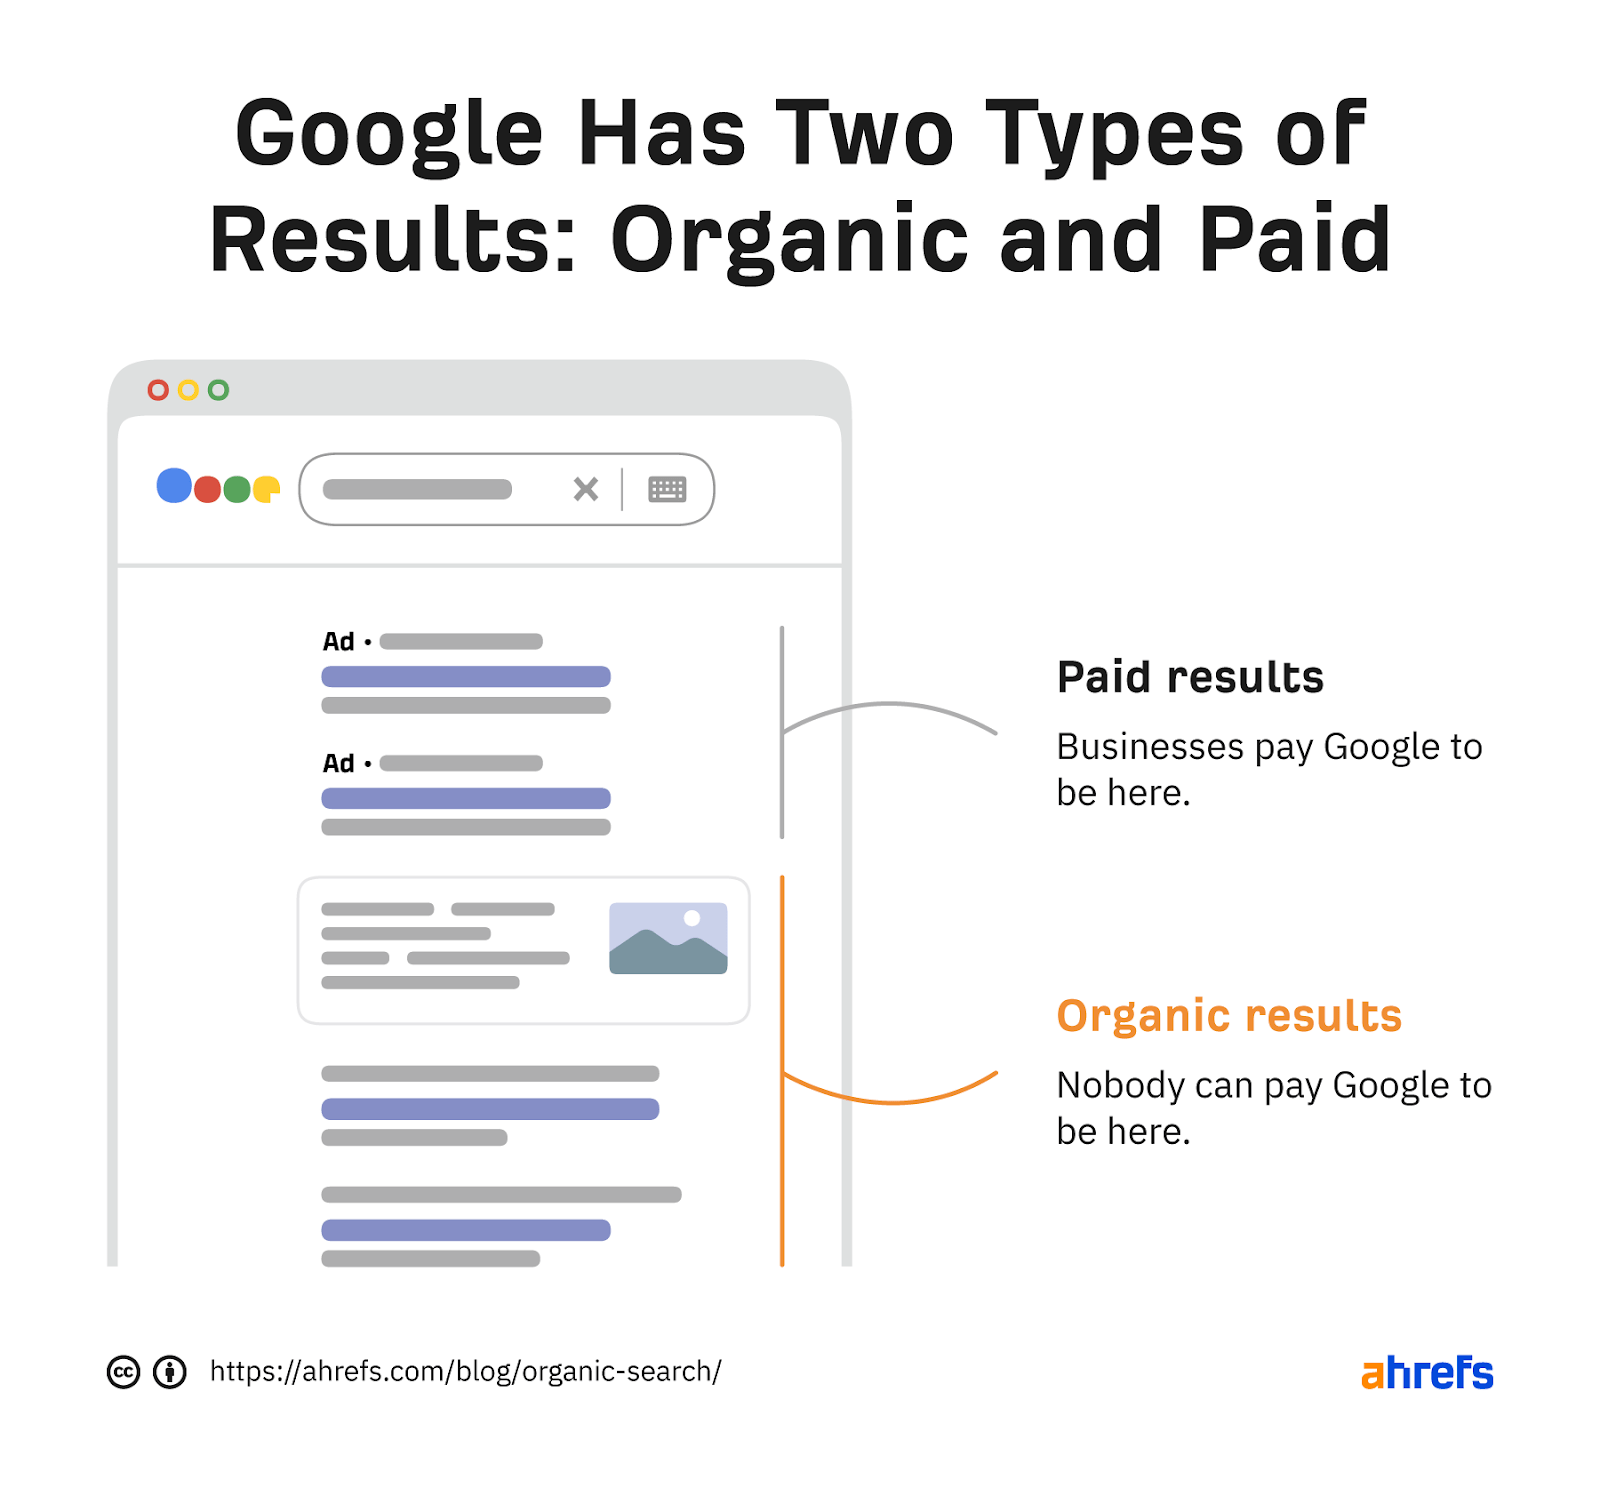 Google has two types of results: organic and paid
